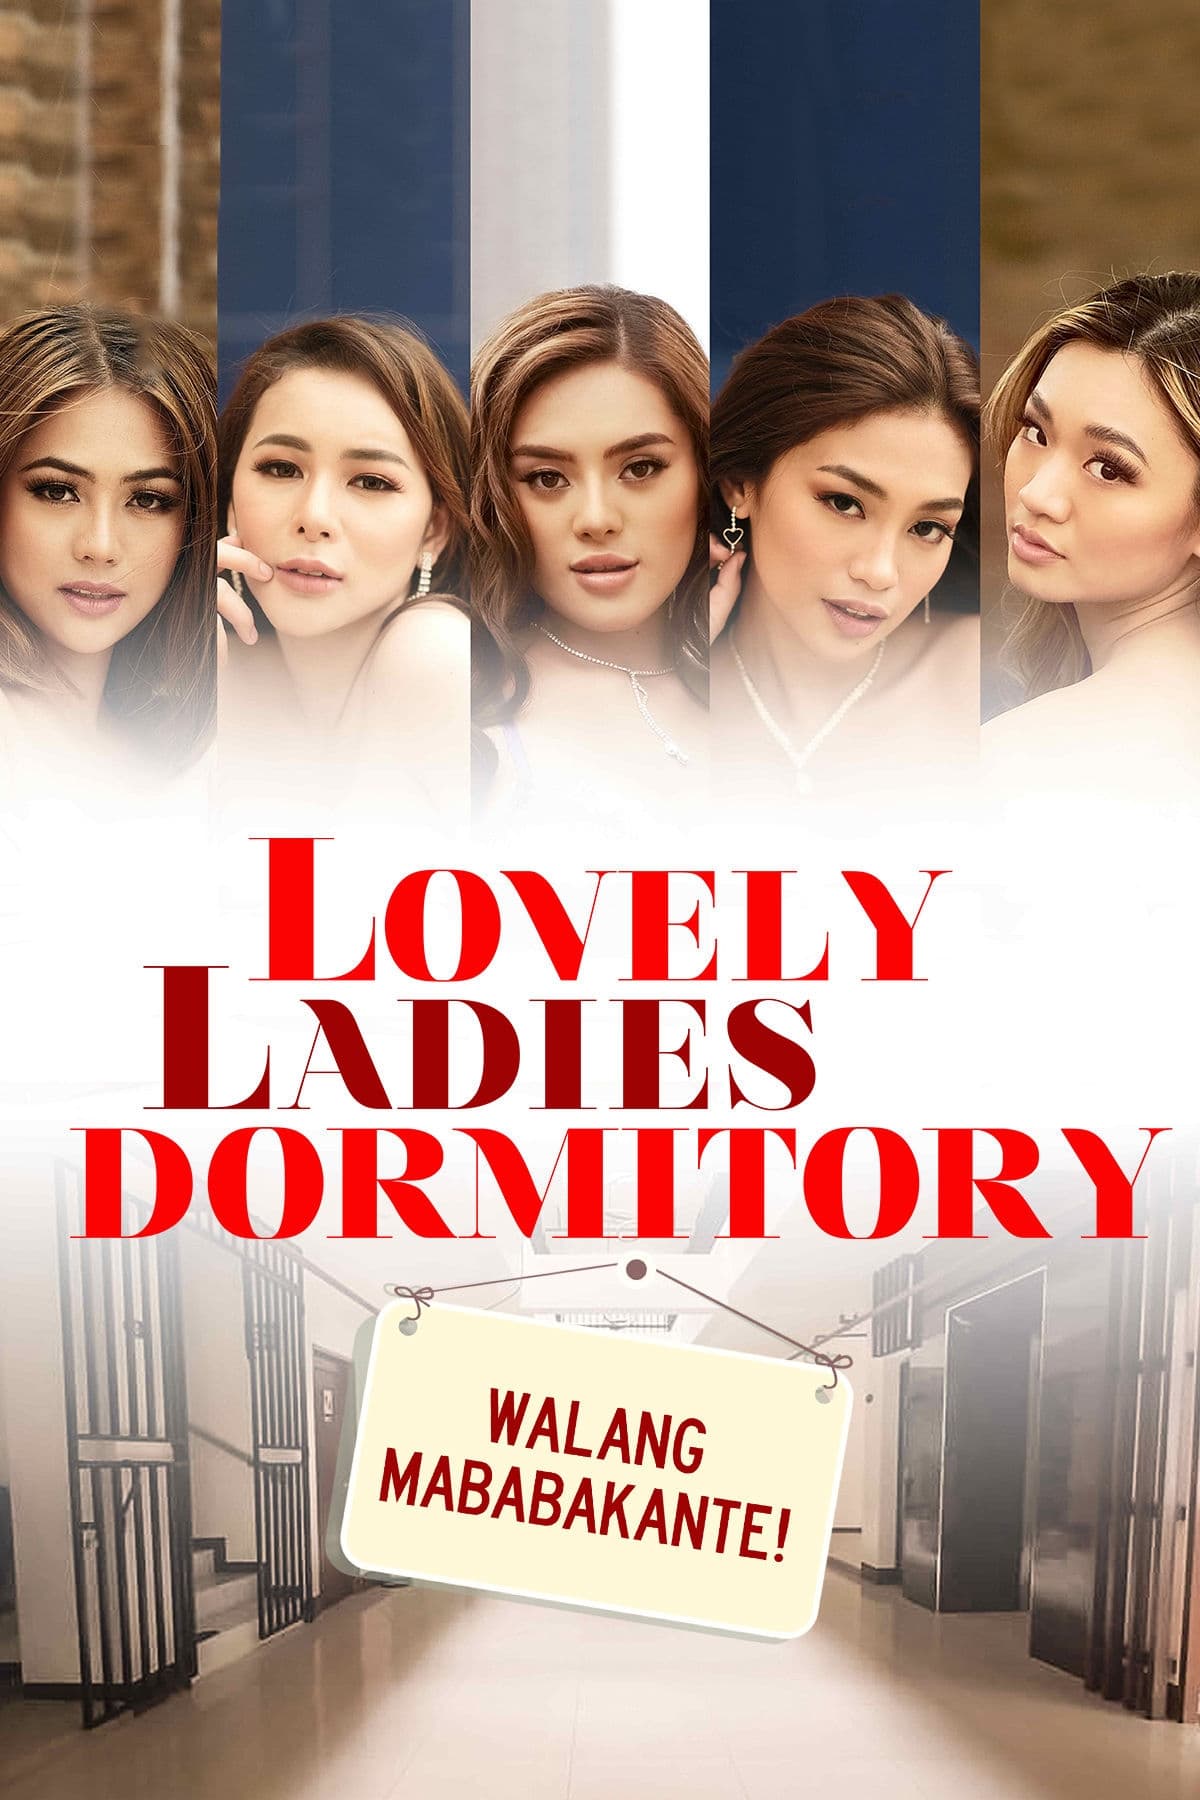 Lovely Ladies Dormitory TV Shows About Student